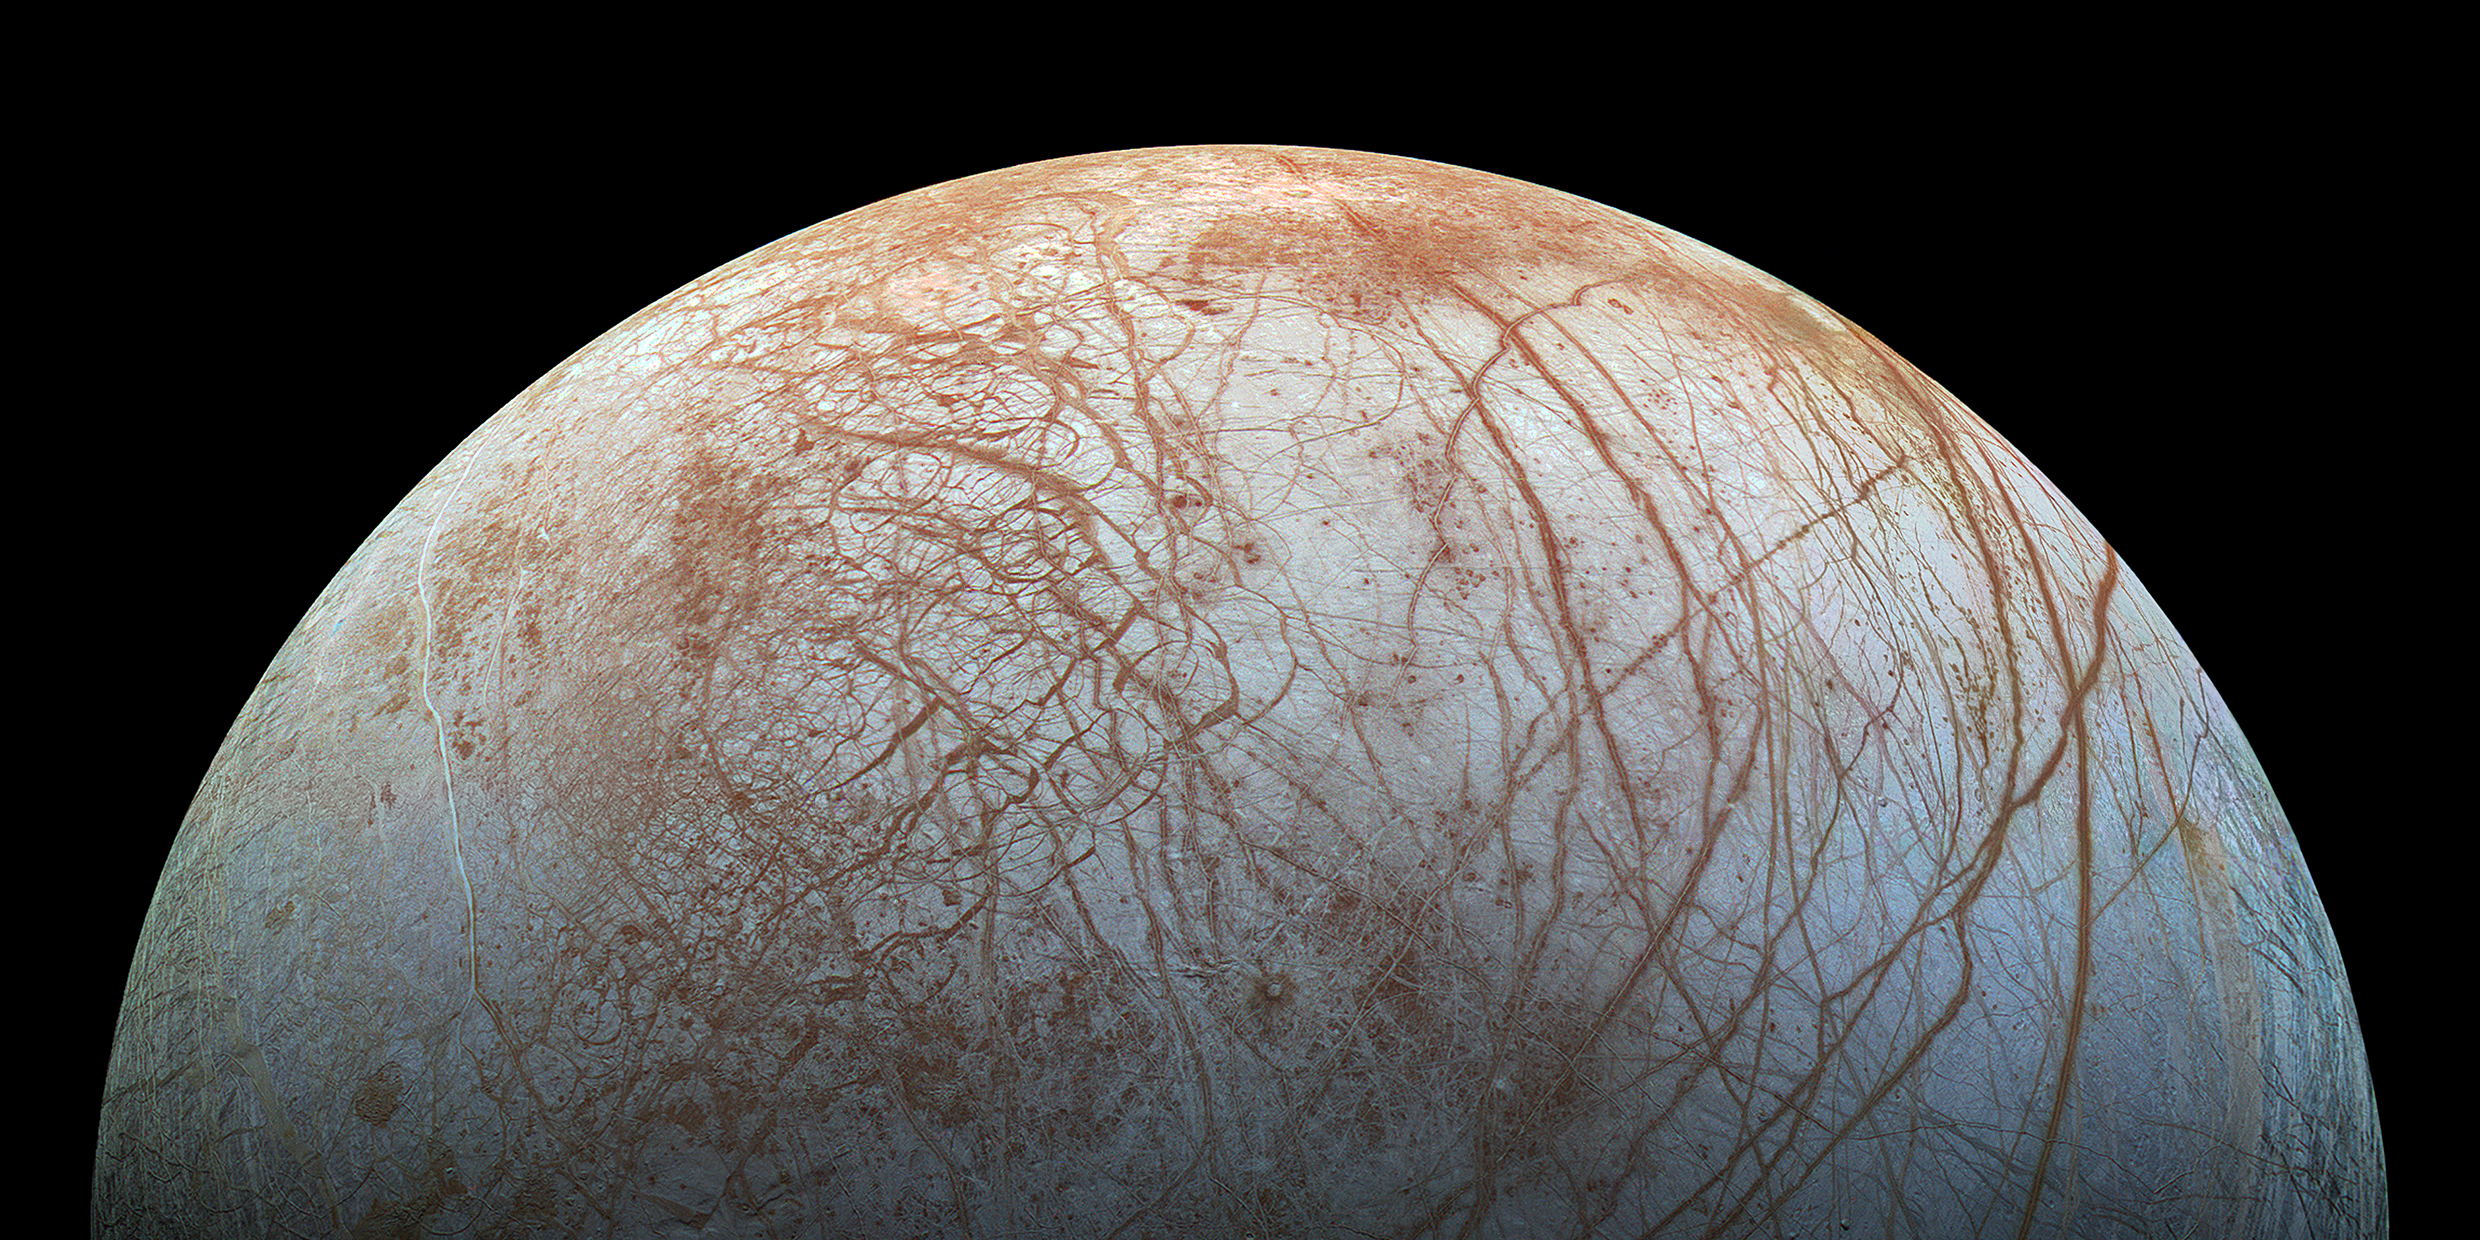 Image of surface of Europa